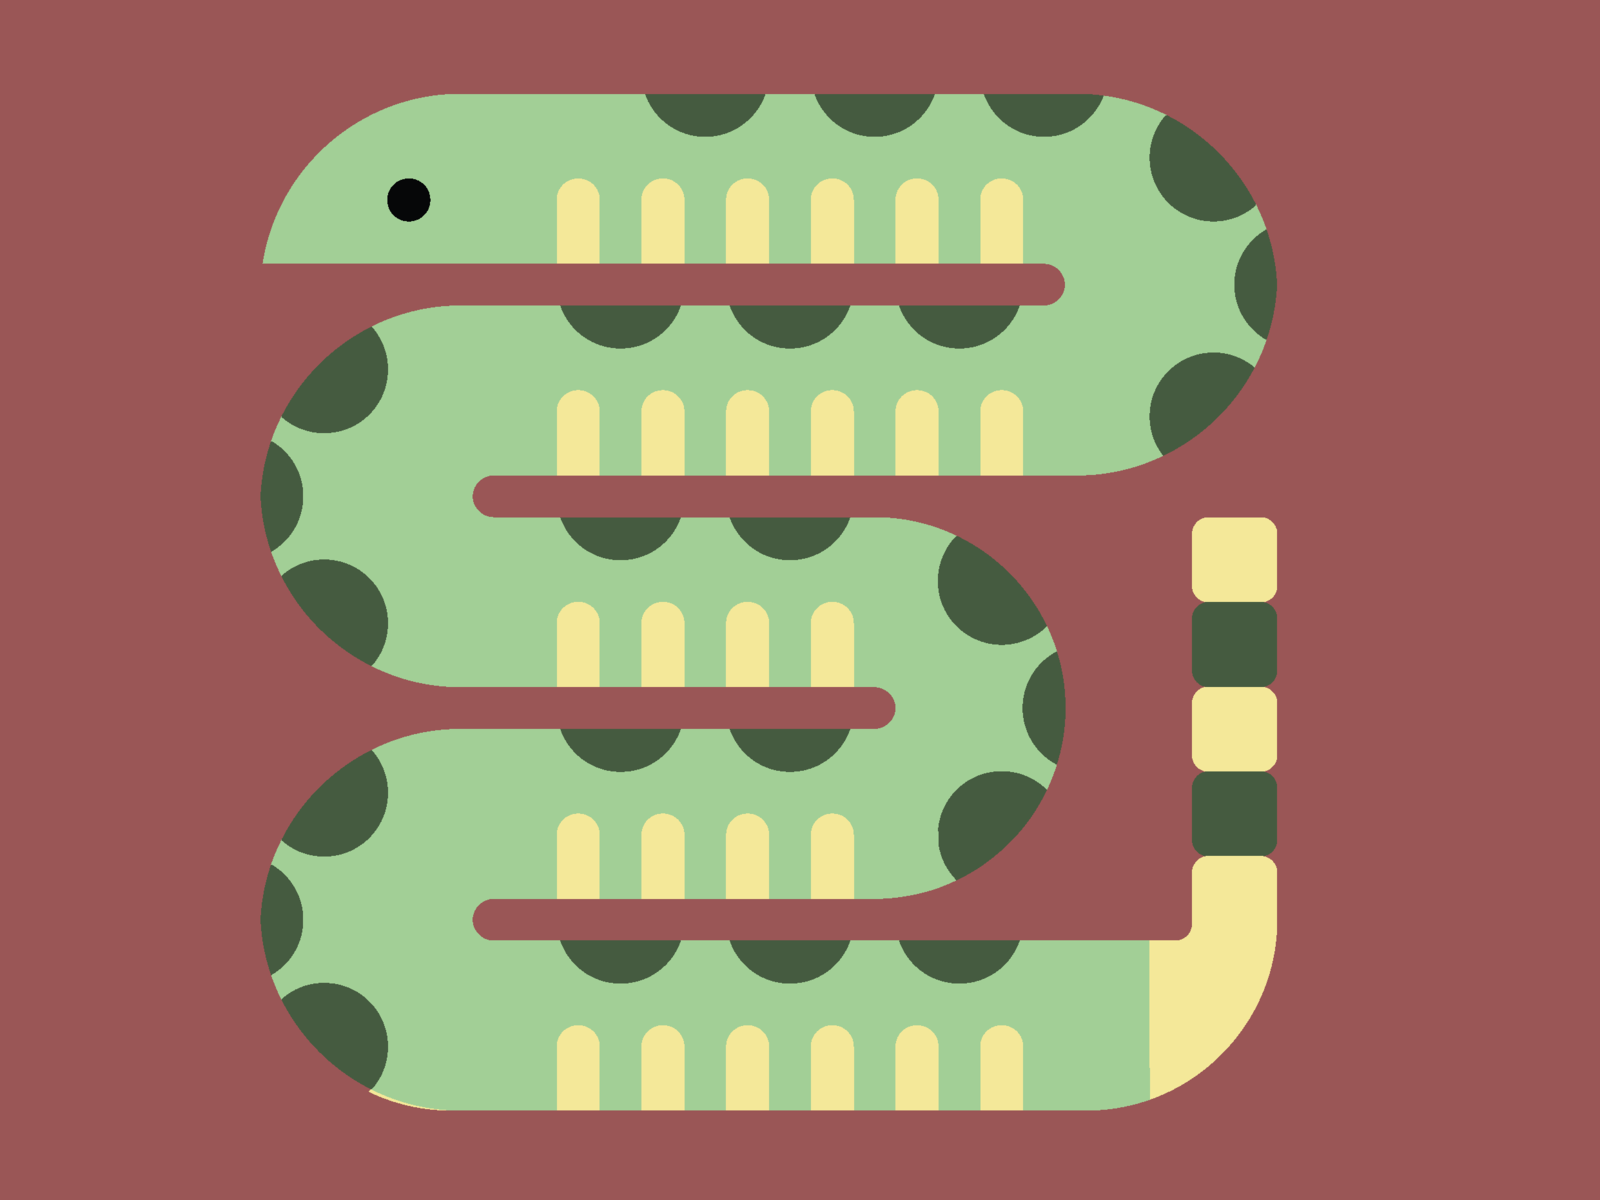 Snake by Anxious Adam on Dribbble